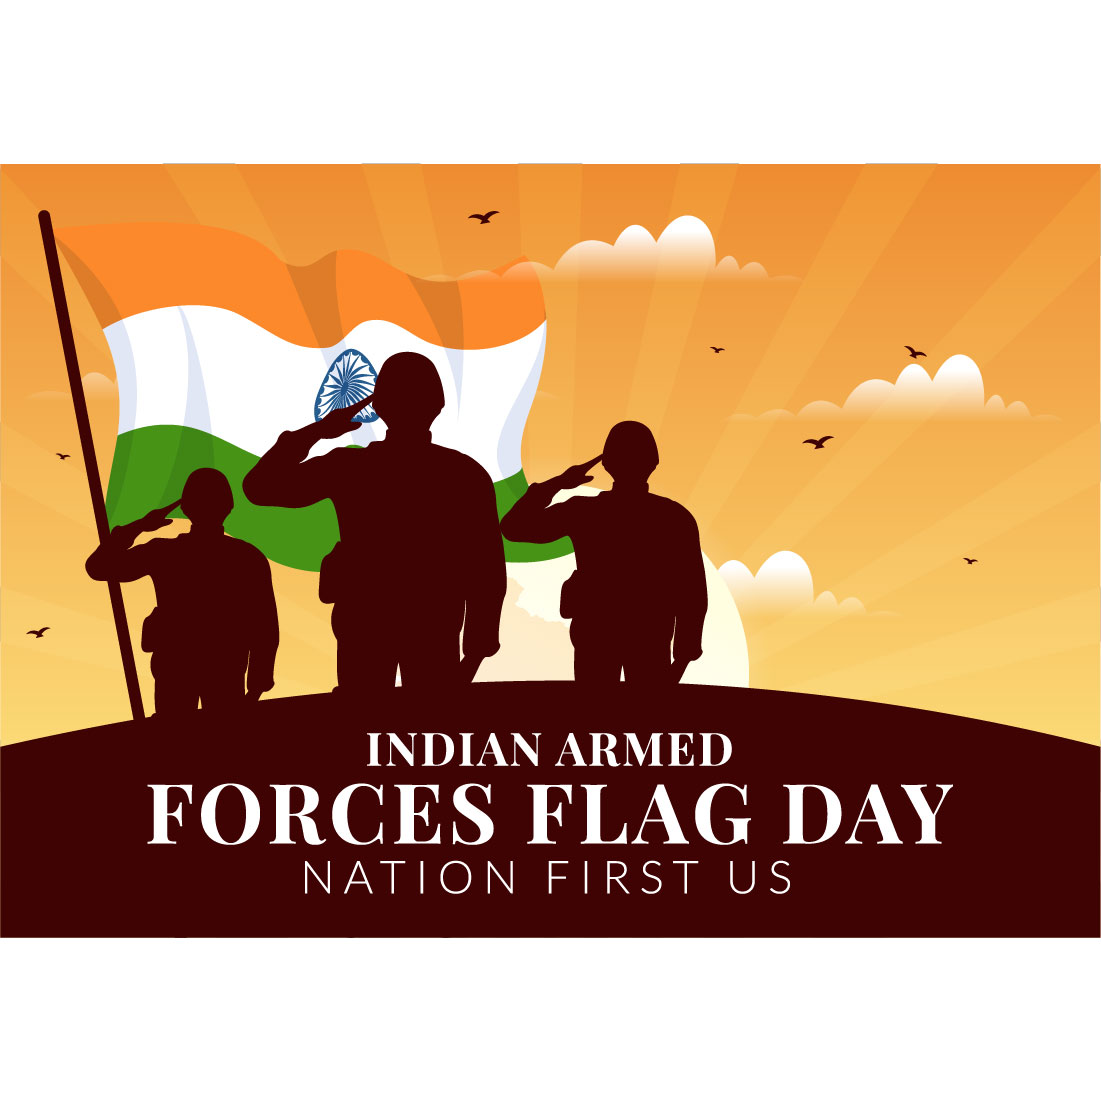 10 Indian Armed Forces Flag Day Illustration preview image.